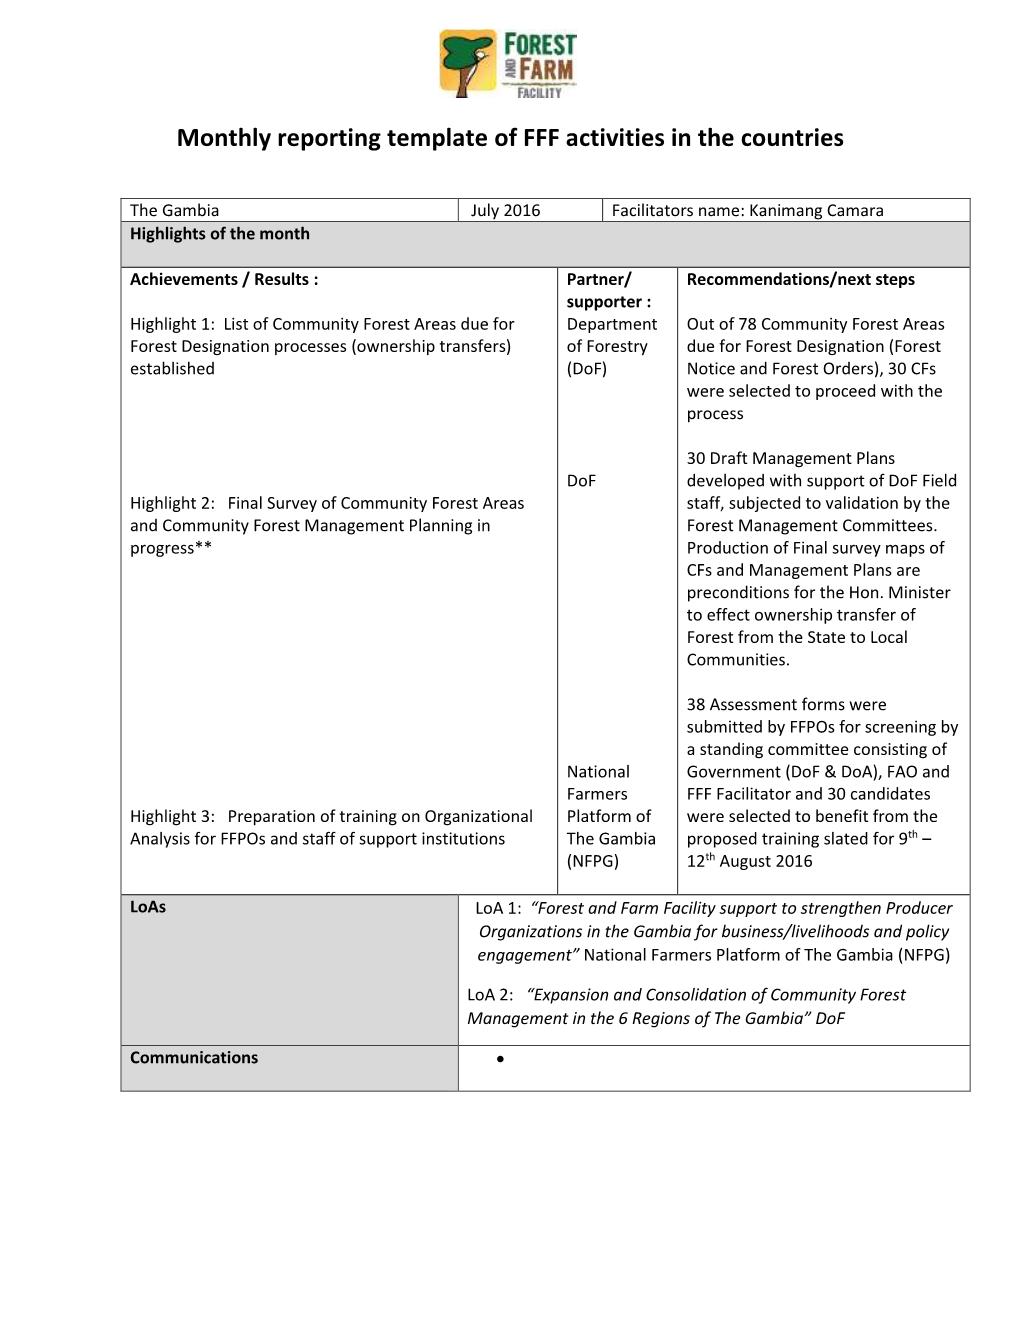 Monthly Reporting Template of FFF Activities in the Countries